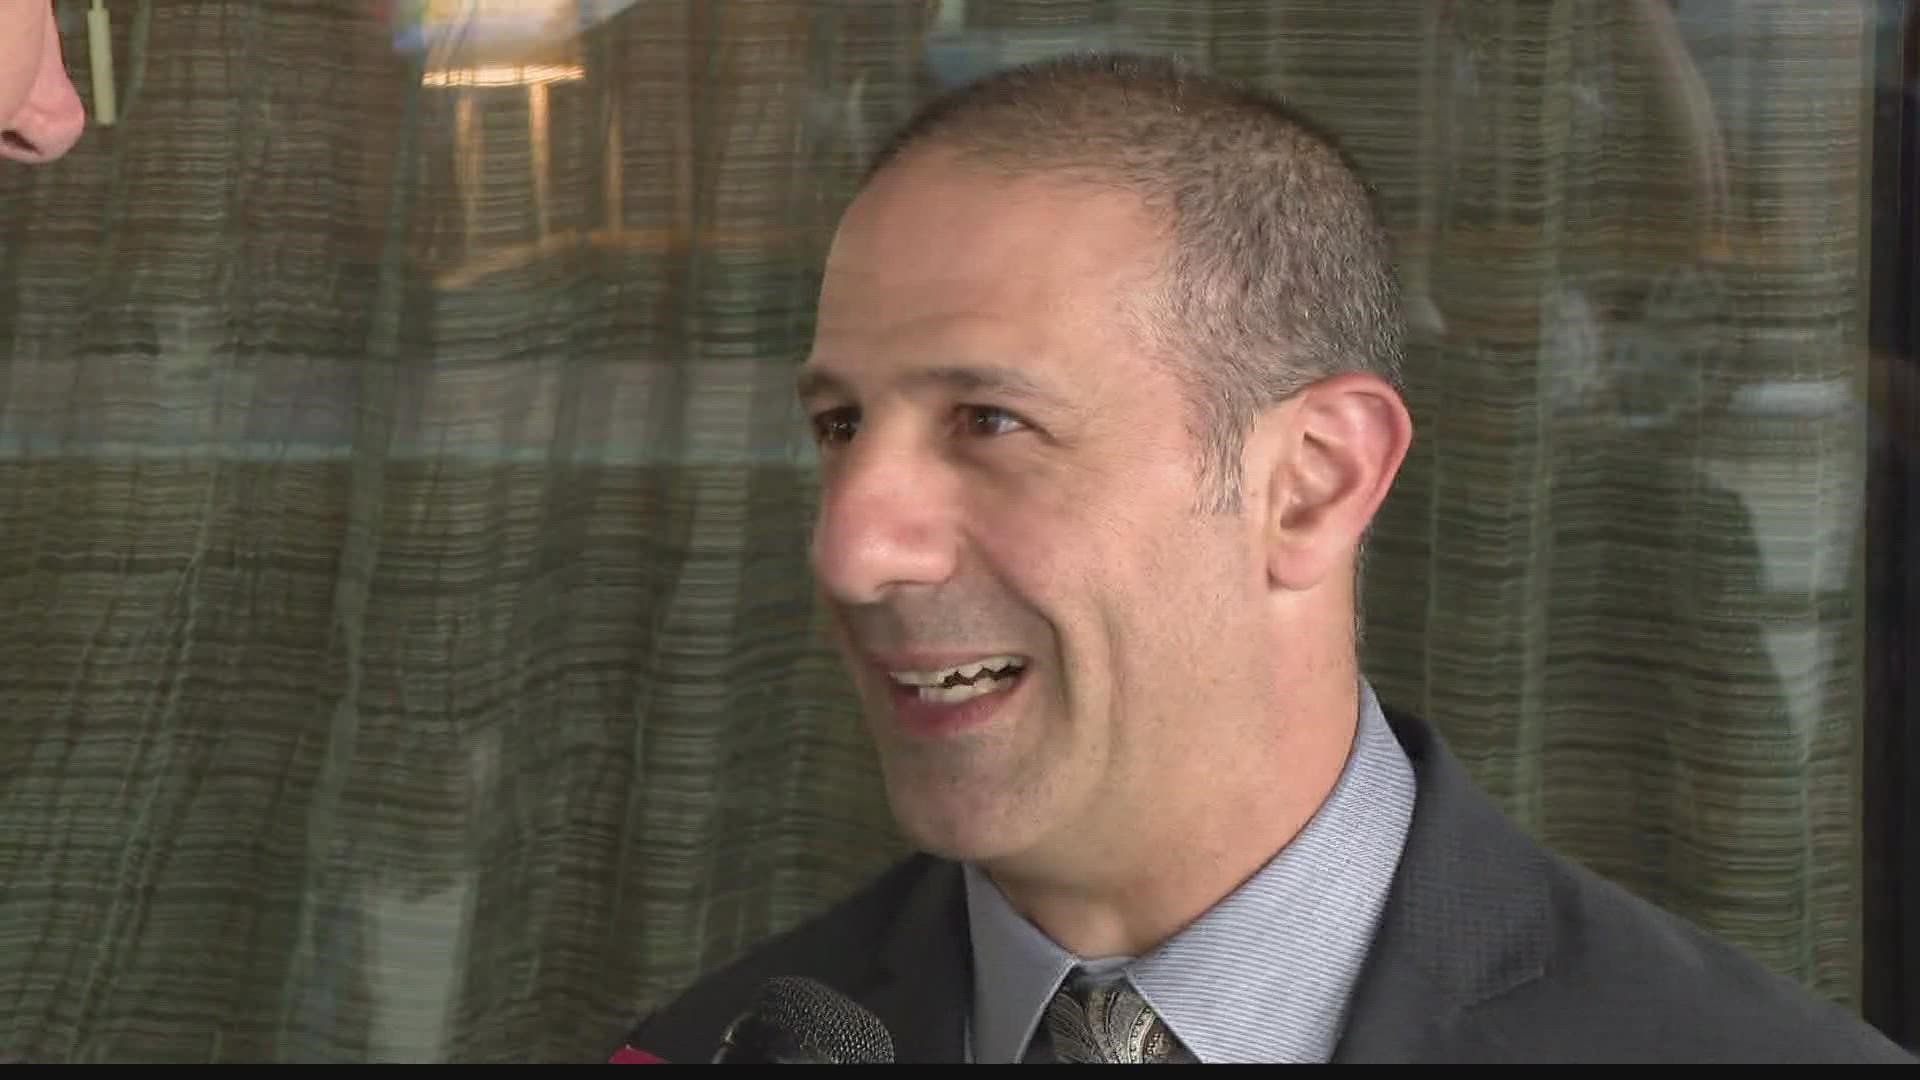 Tony Kanaan talks about his third-place finish on Sunday and his future at the Indianapolis 500.